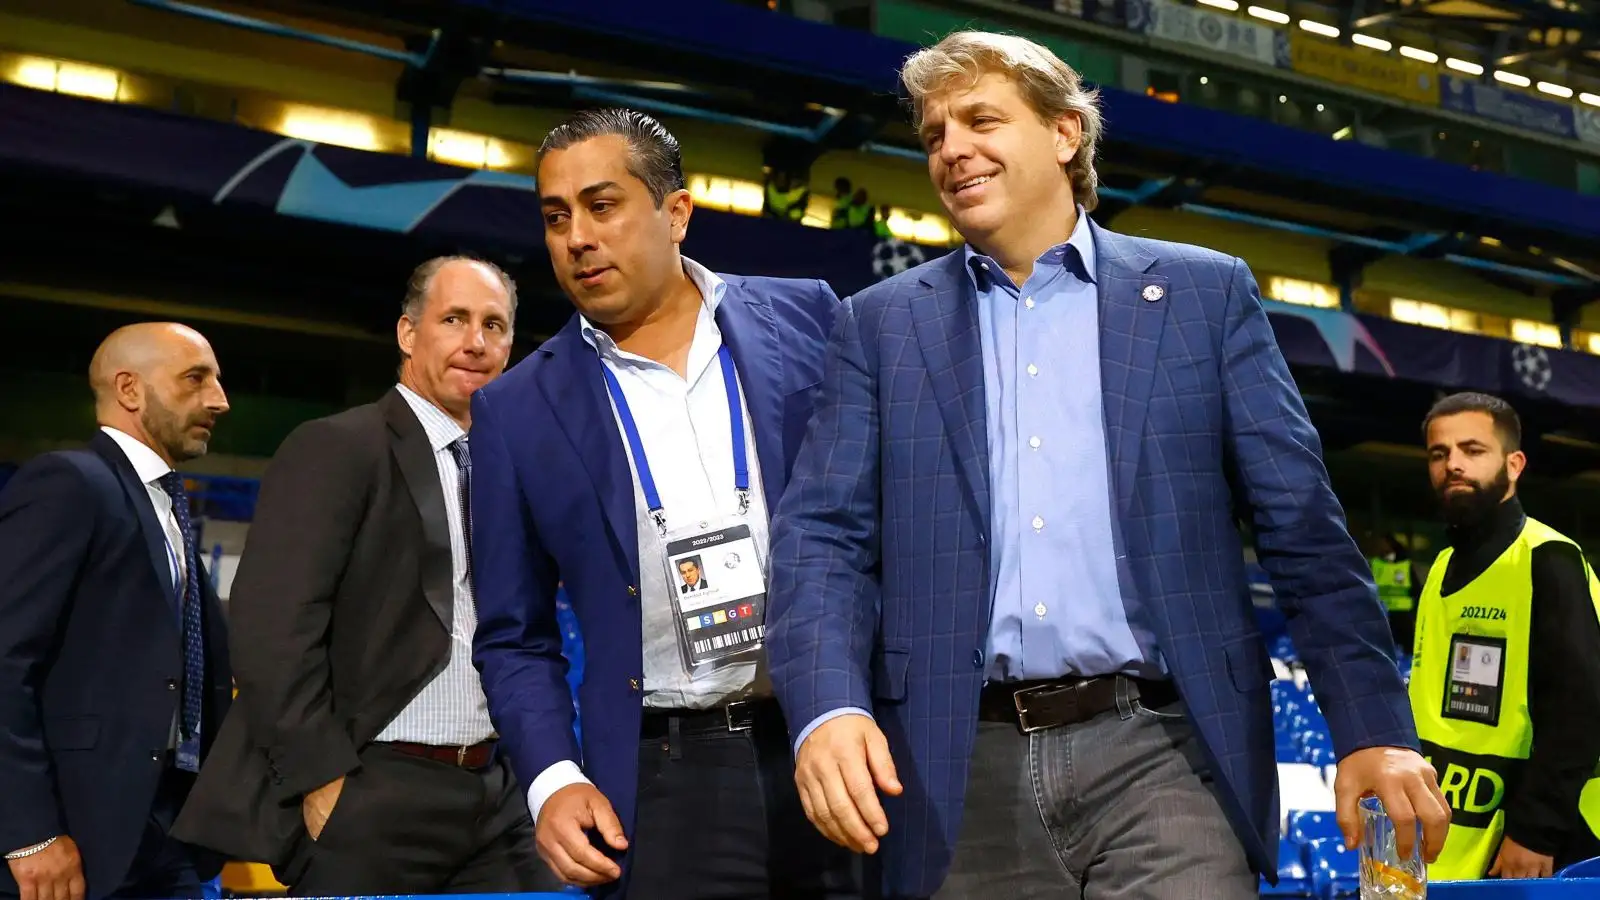 Chelsea co-owners Todd Boehly and Behdad Eghbali